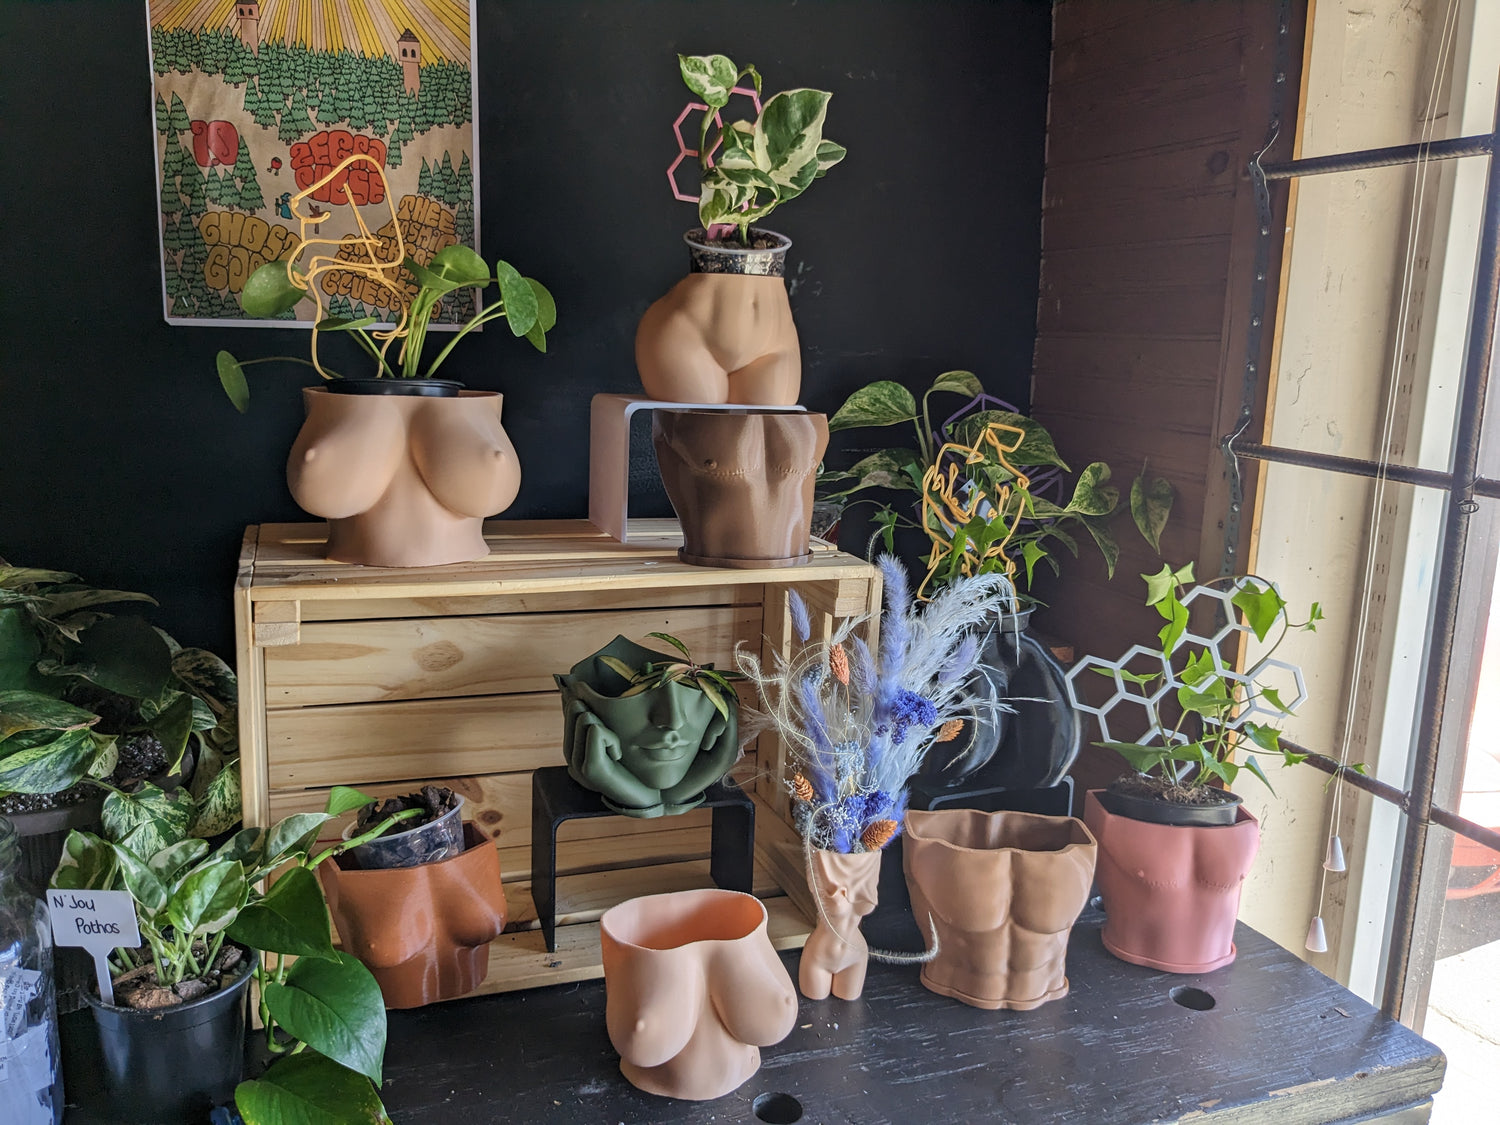 A group of body positive planters on a wooden shelf, featuring different body shapes in a variety of colours. The planters include smaller breasts, larger breasts, a top surgery planter, and several others. Live plants including pothos and ivy are seen in the planters on the shelf, with body positive trellises providing support. These unique planters offer a fun and positive way to display your favorite plants while celebrating body diversity.